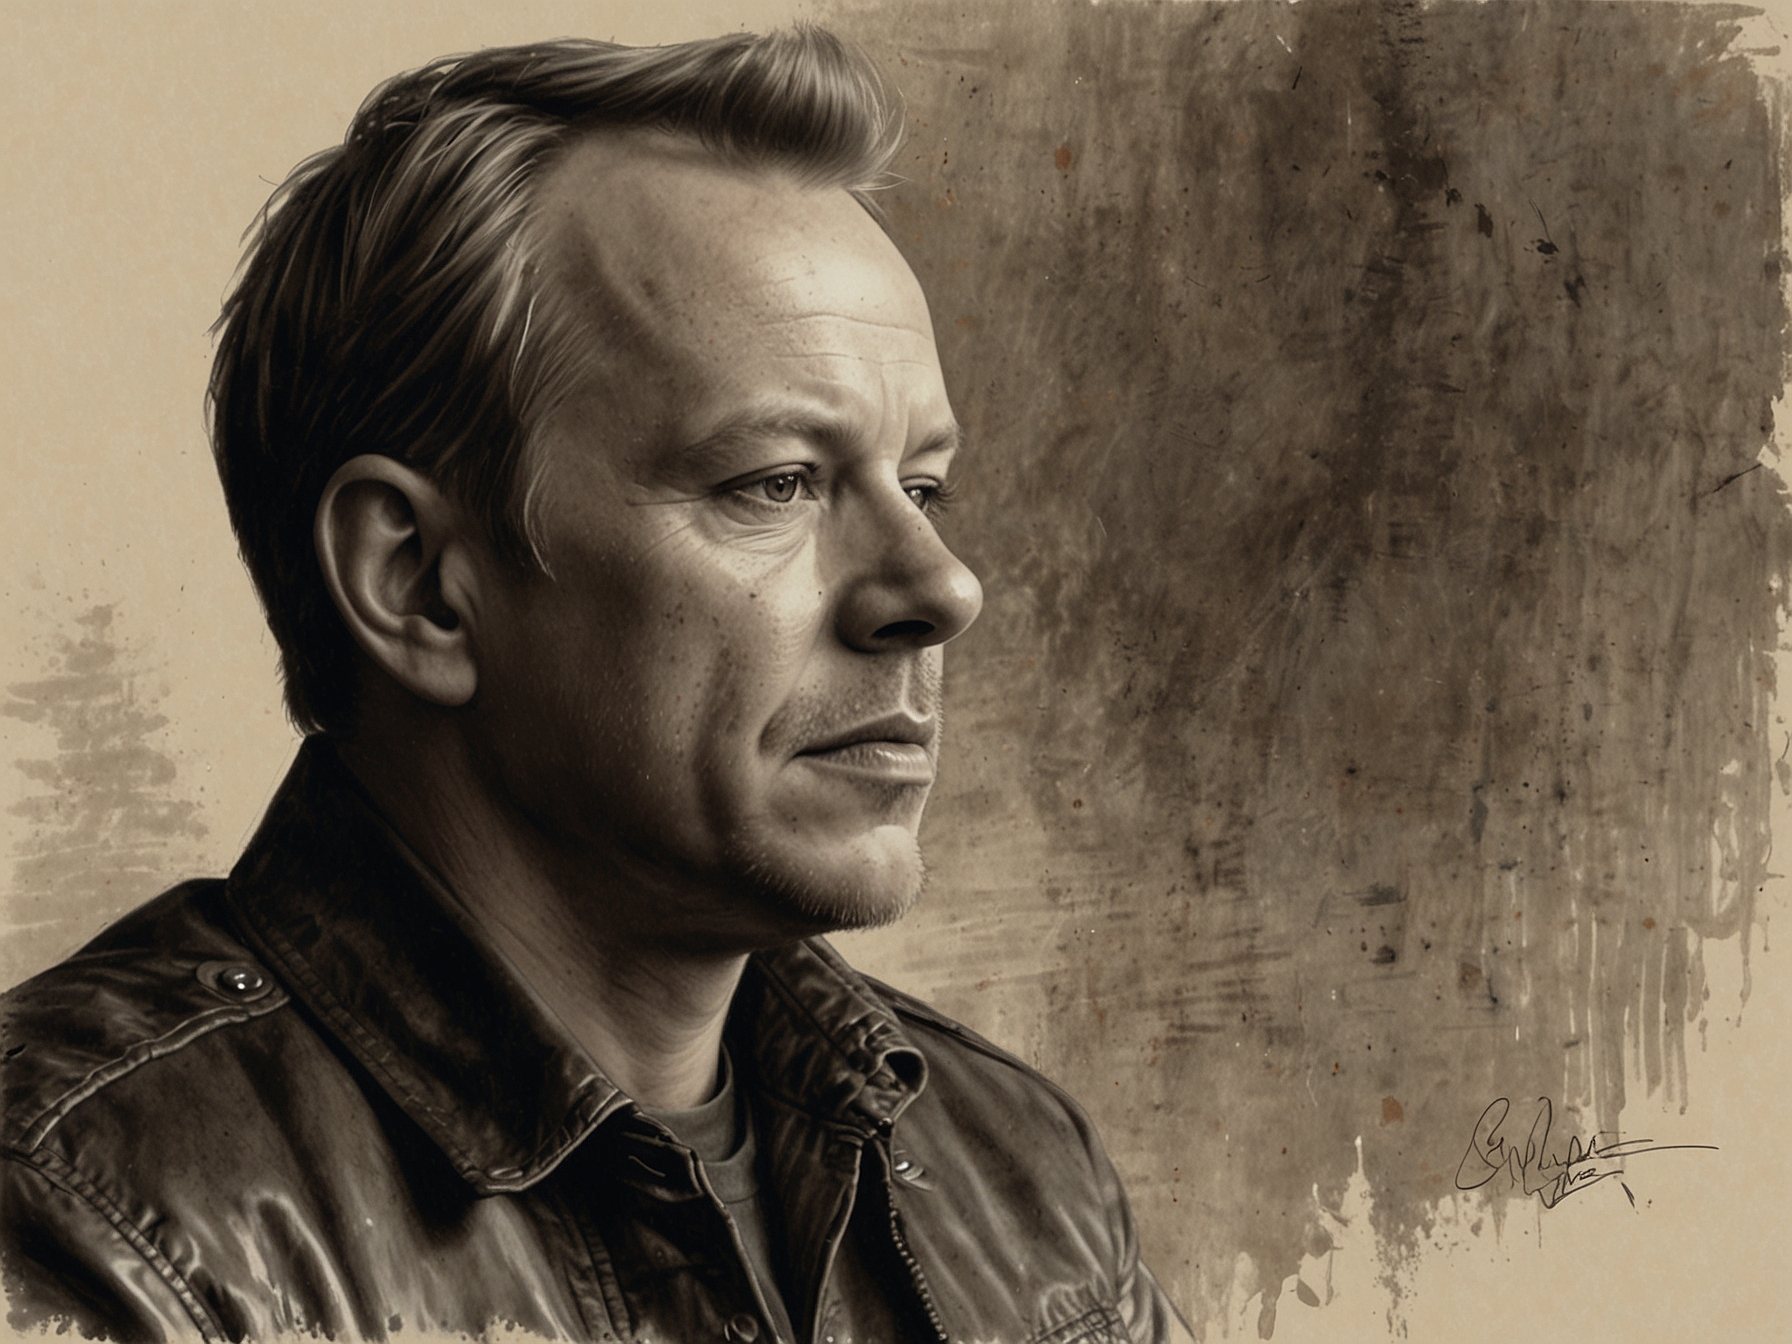 Kiefer Sutherland reminiscing about his early years, capturing a poignant moment of reflection that highlights the distance and separation from his father.